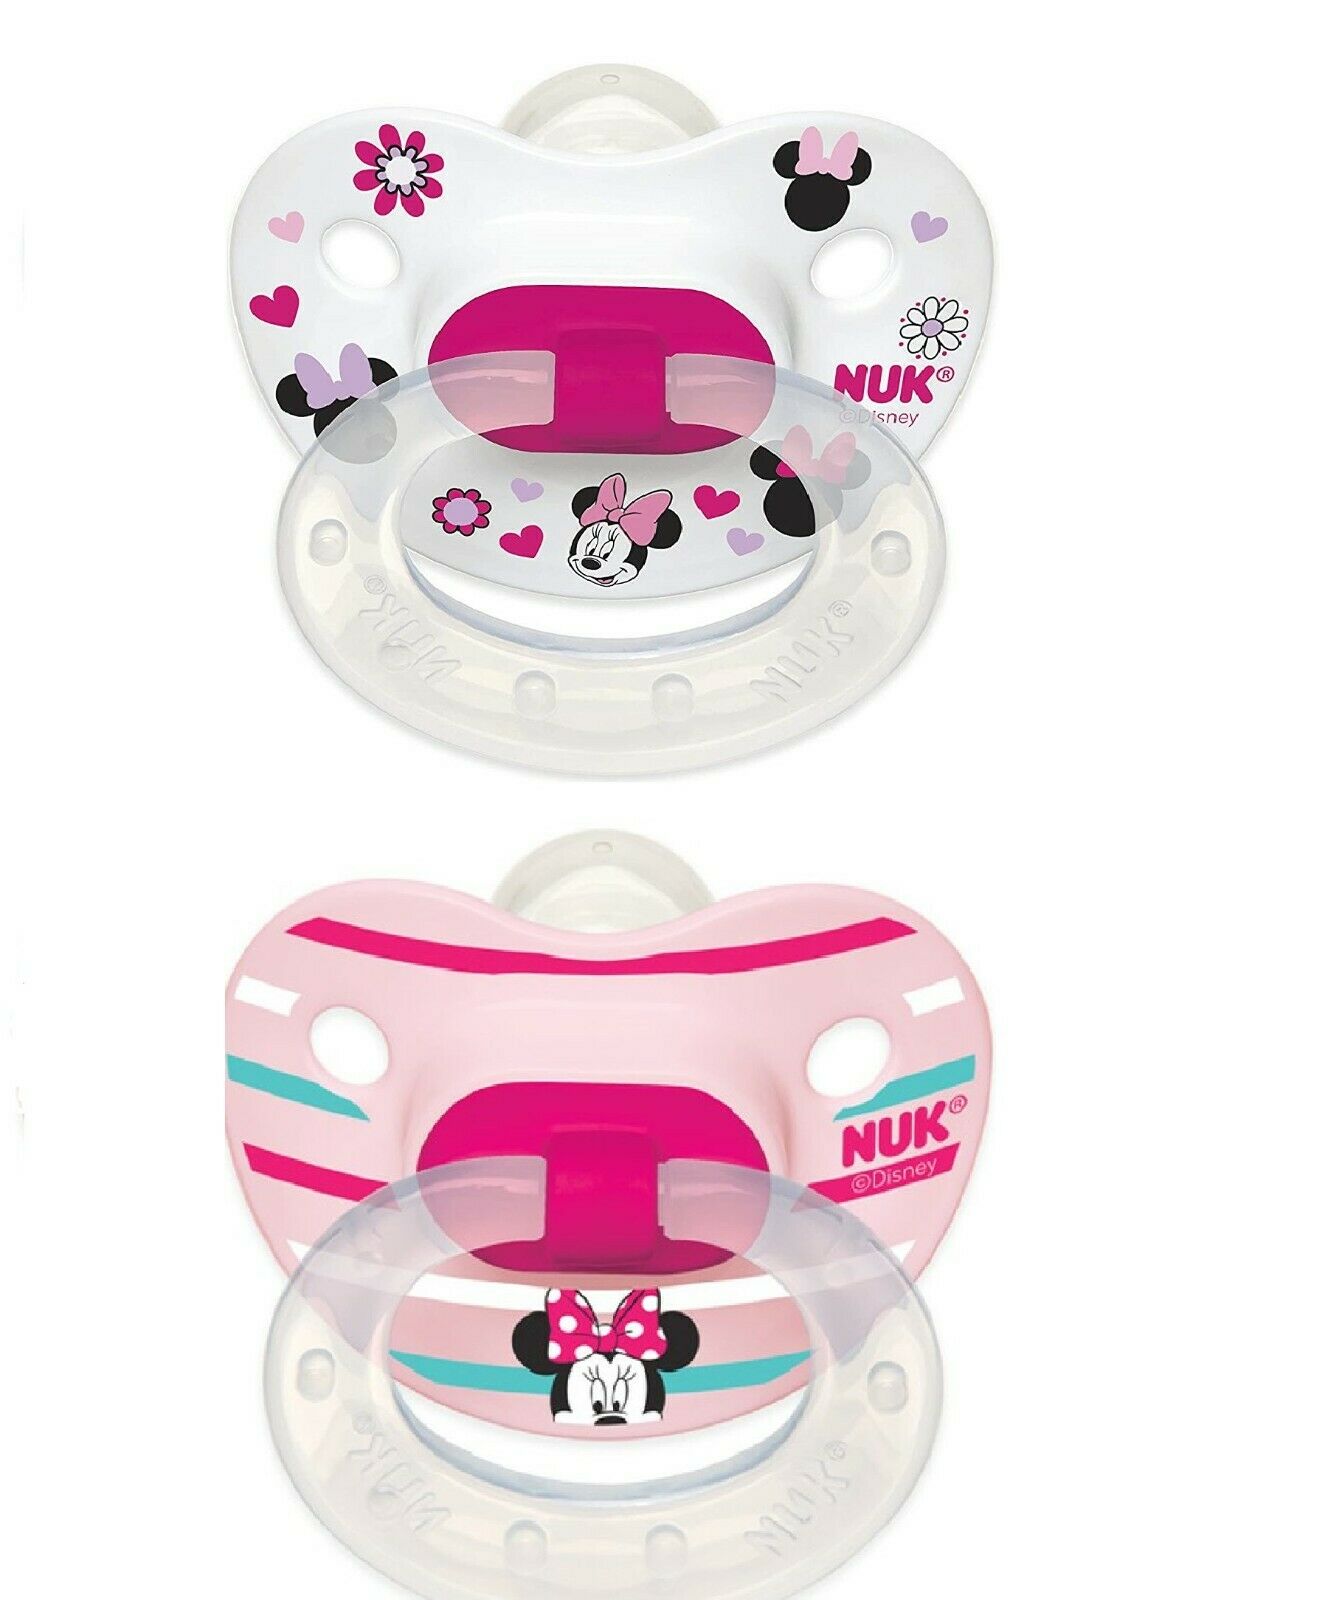 Nuk Disney Minnie Mouse Orthodontic Pacifier 2 Pack